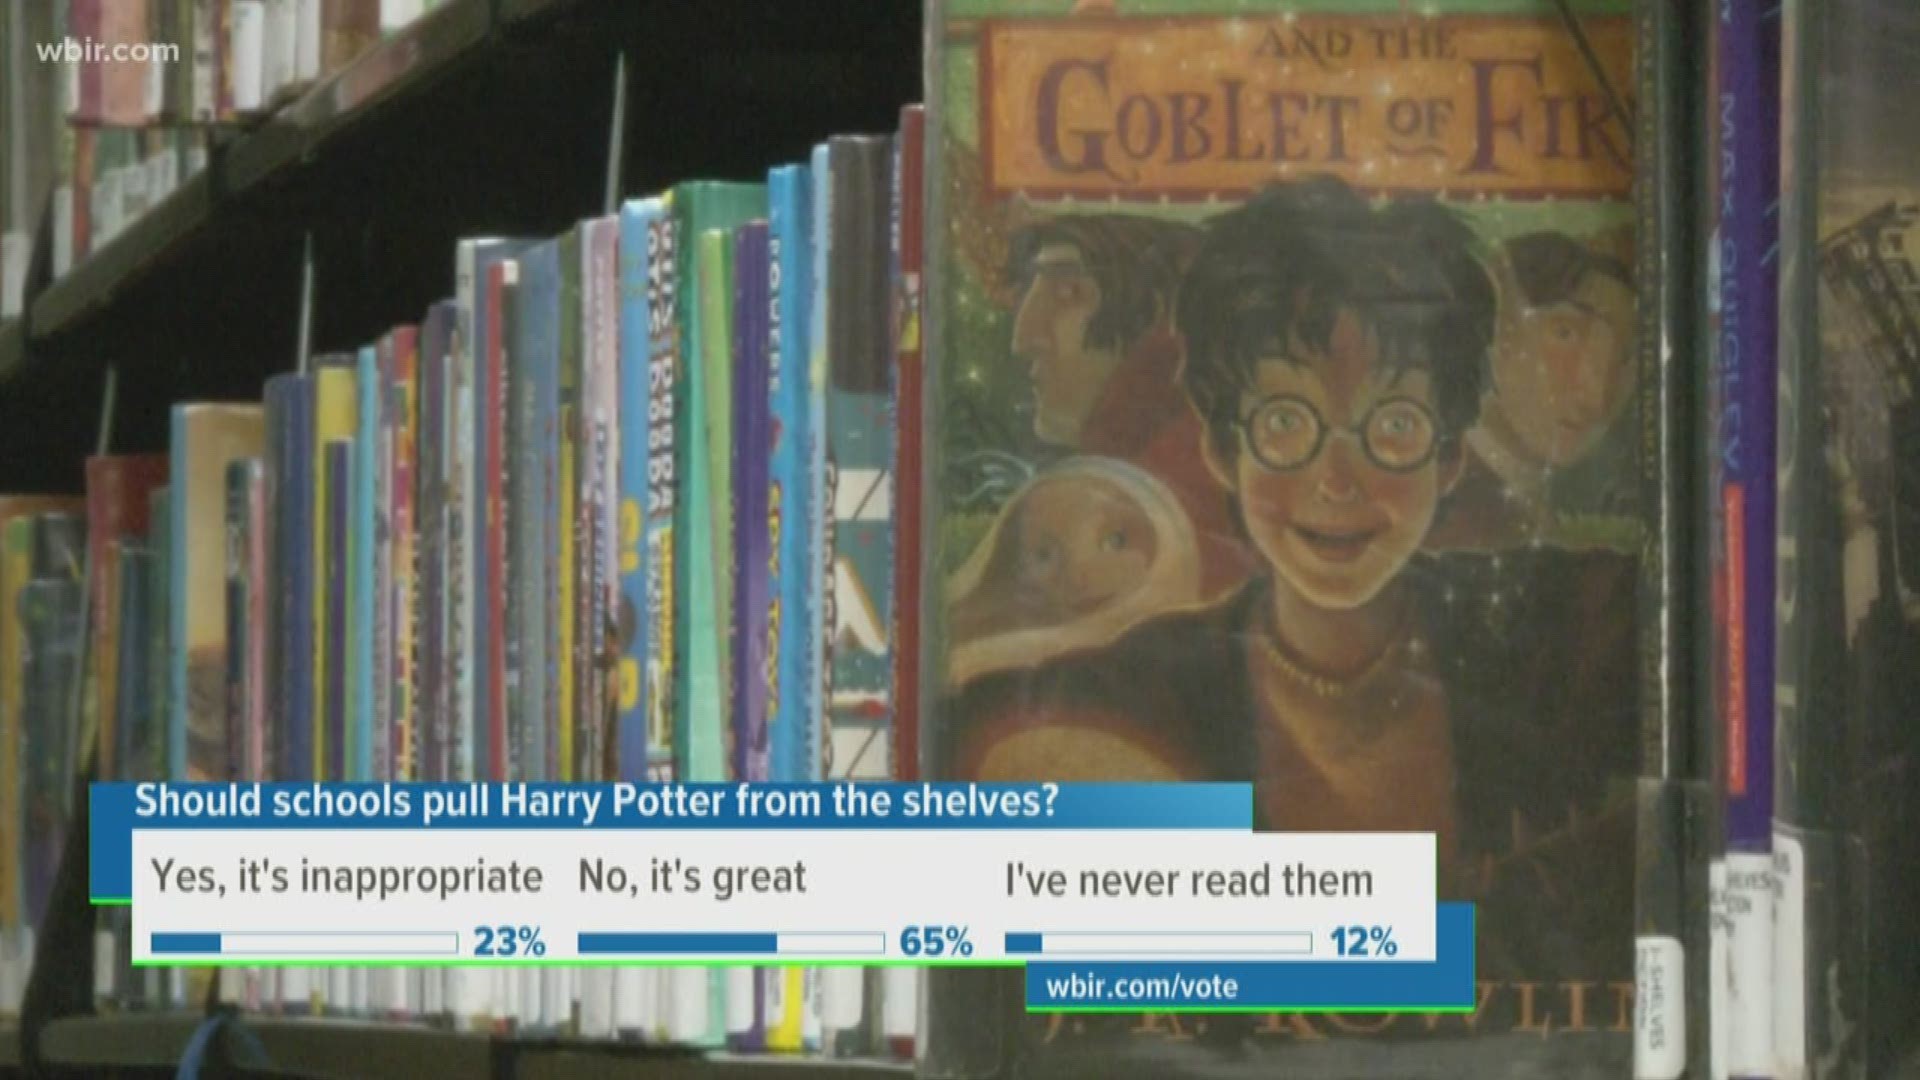 Harry Potter books are no longer on library shelves at a Nashville Catholic school after a pastor said they were inappropriate. But a downtown Knoxville church believes the books shine in a different light.